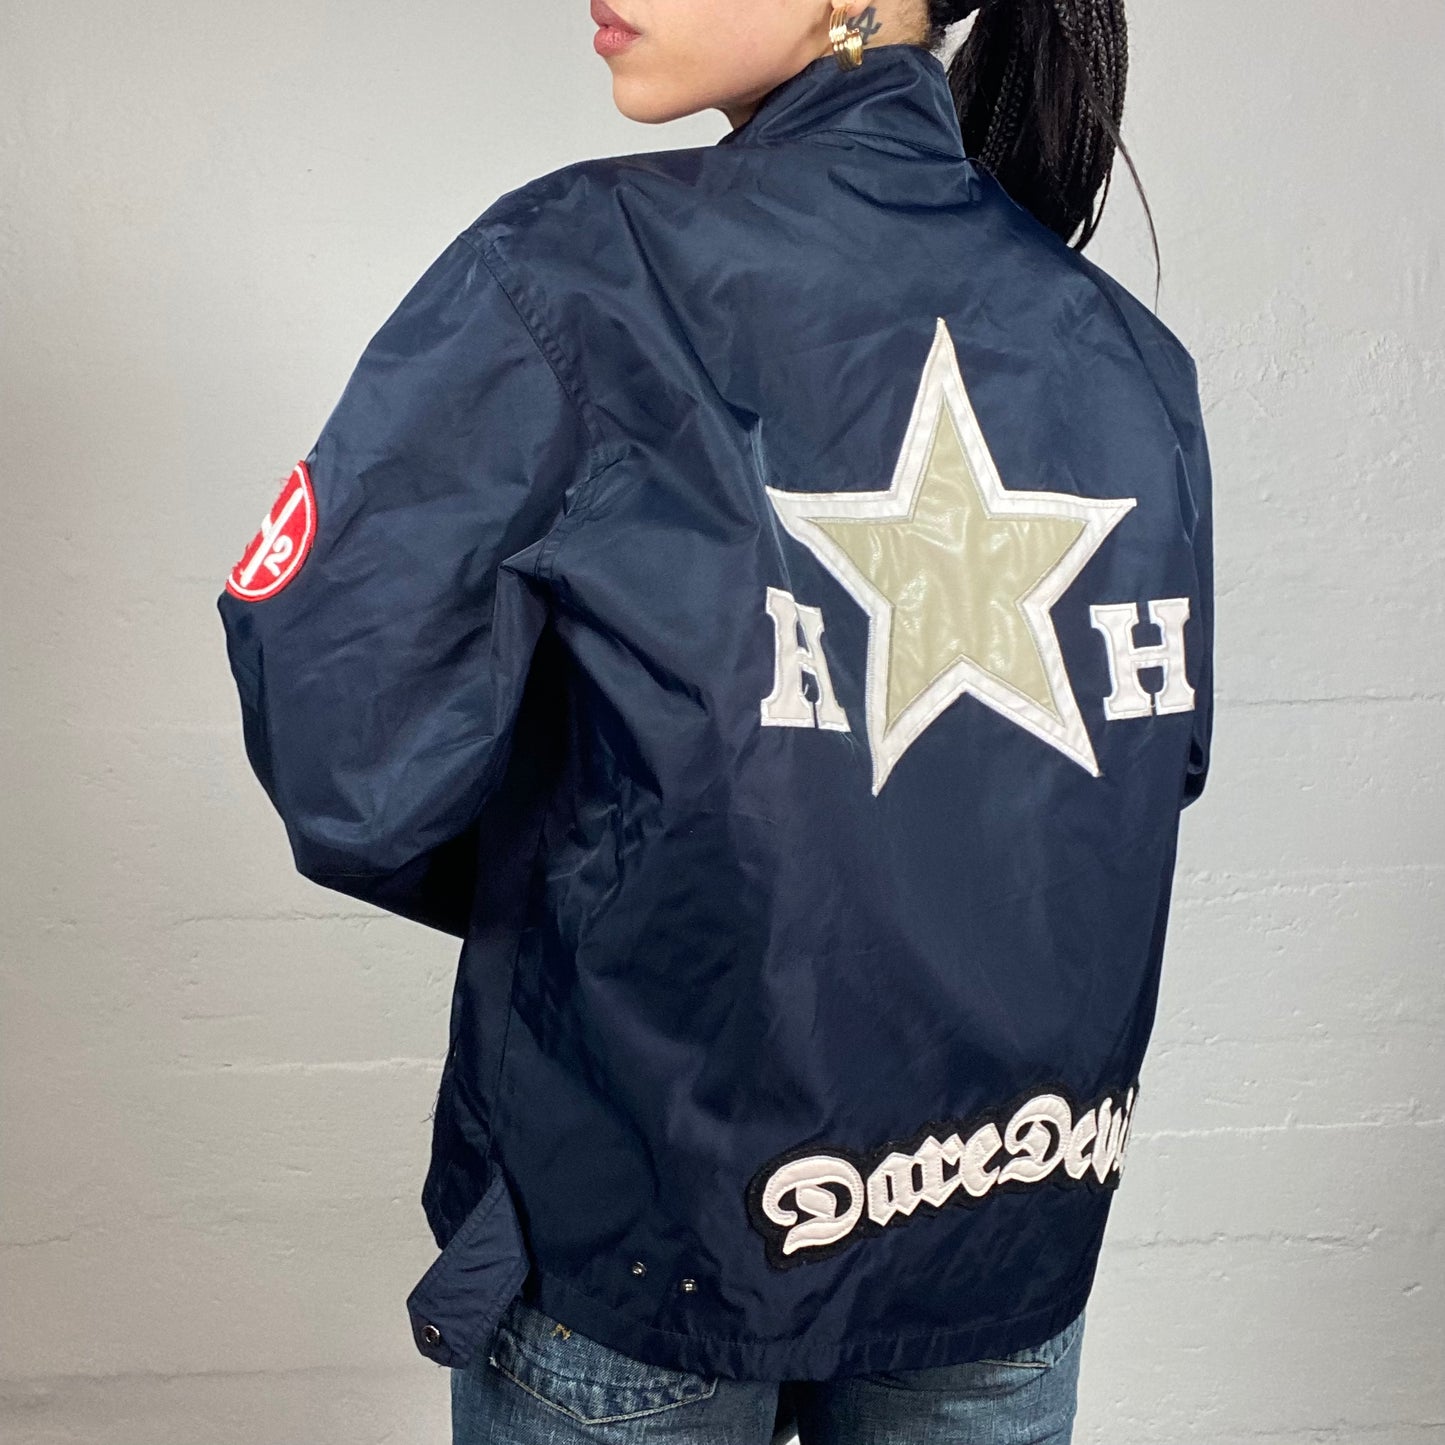 Vintage 90's Harrison Sporty Short Oversized Biker Jacket with Multiple Patches Covering (L)